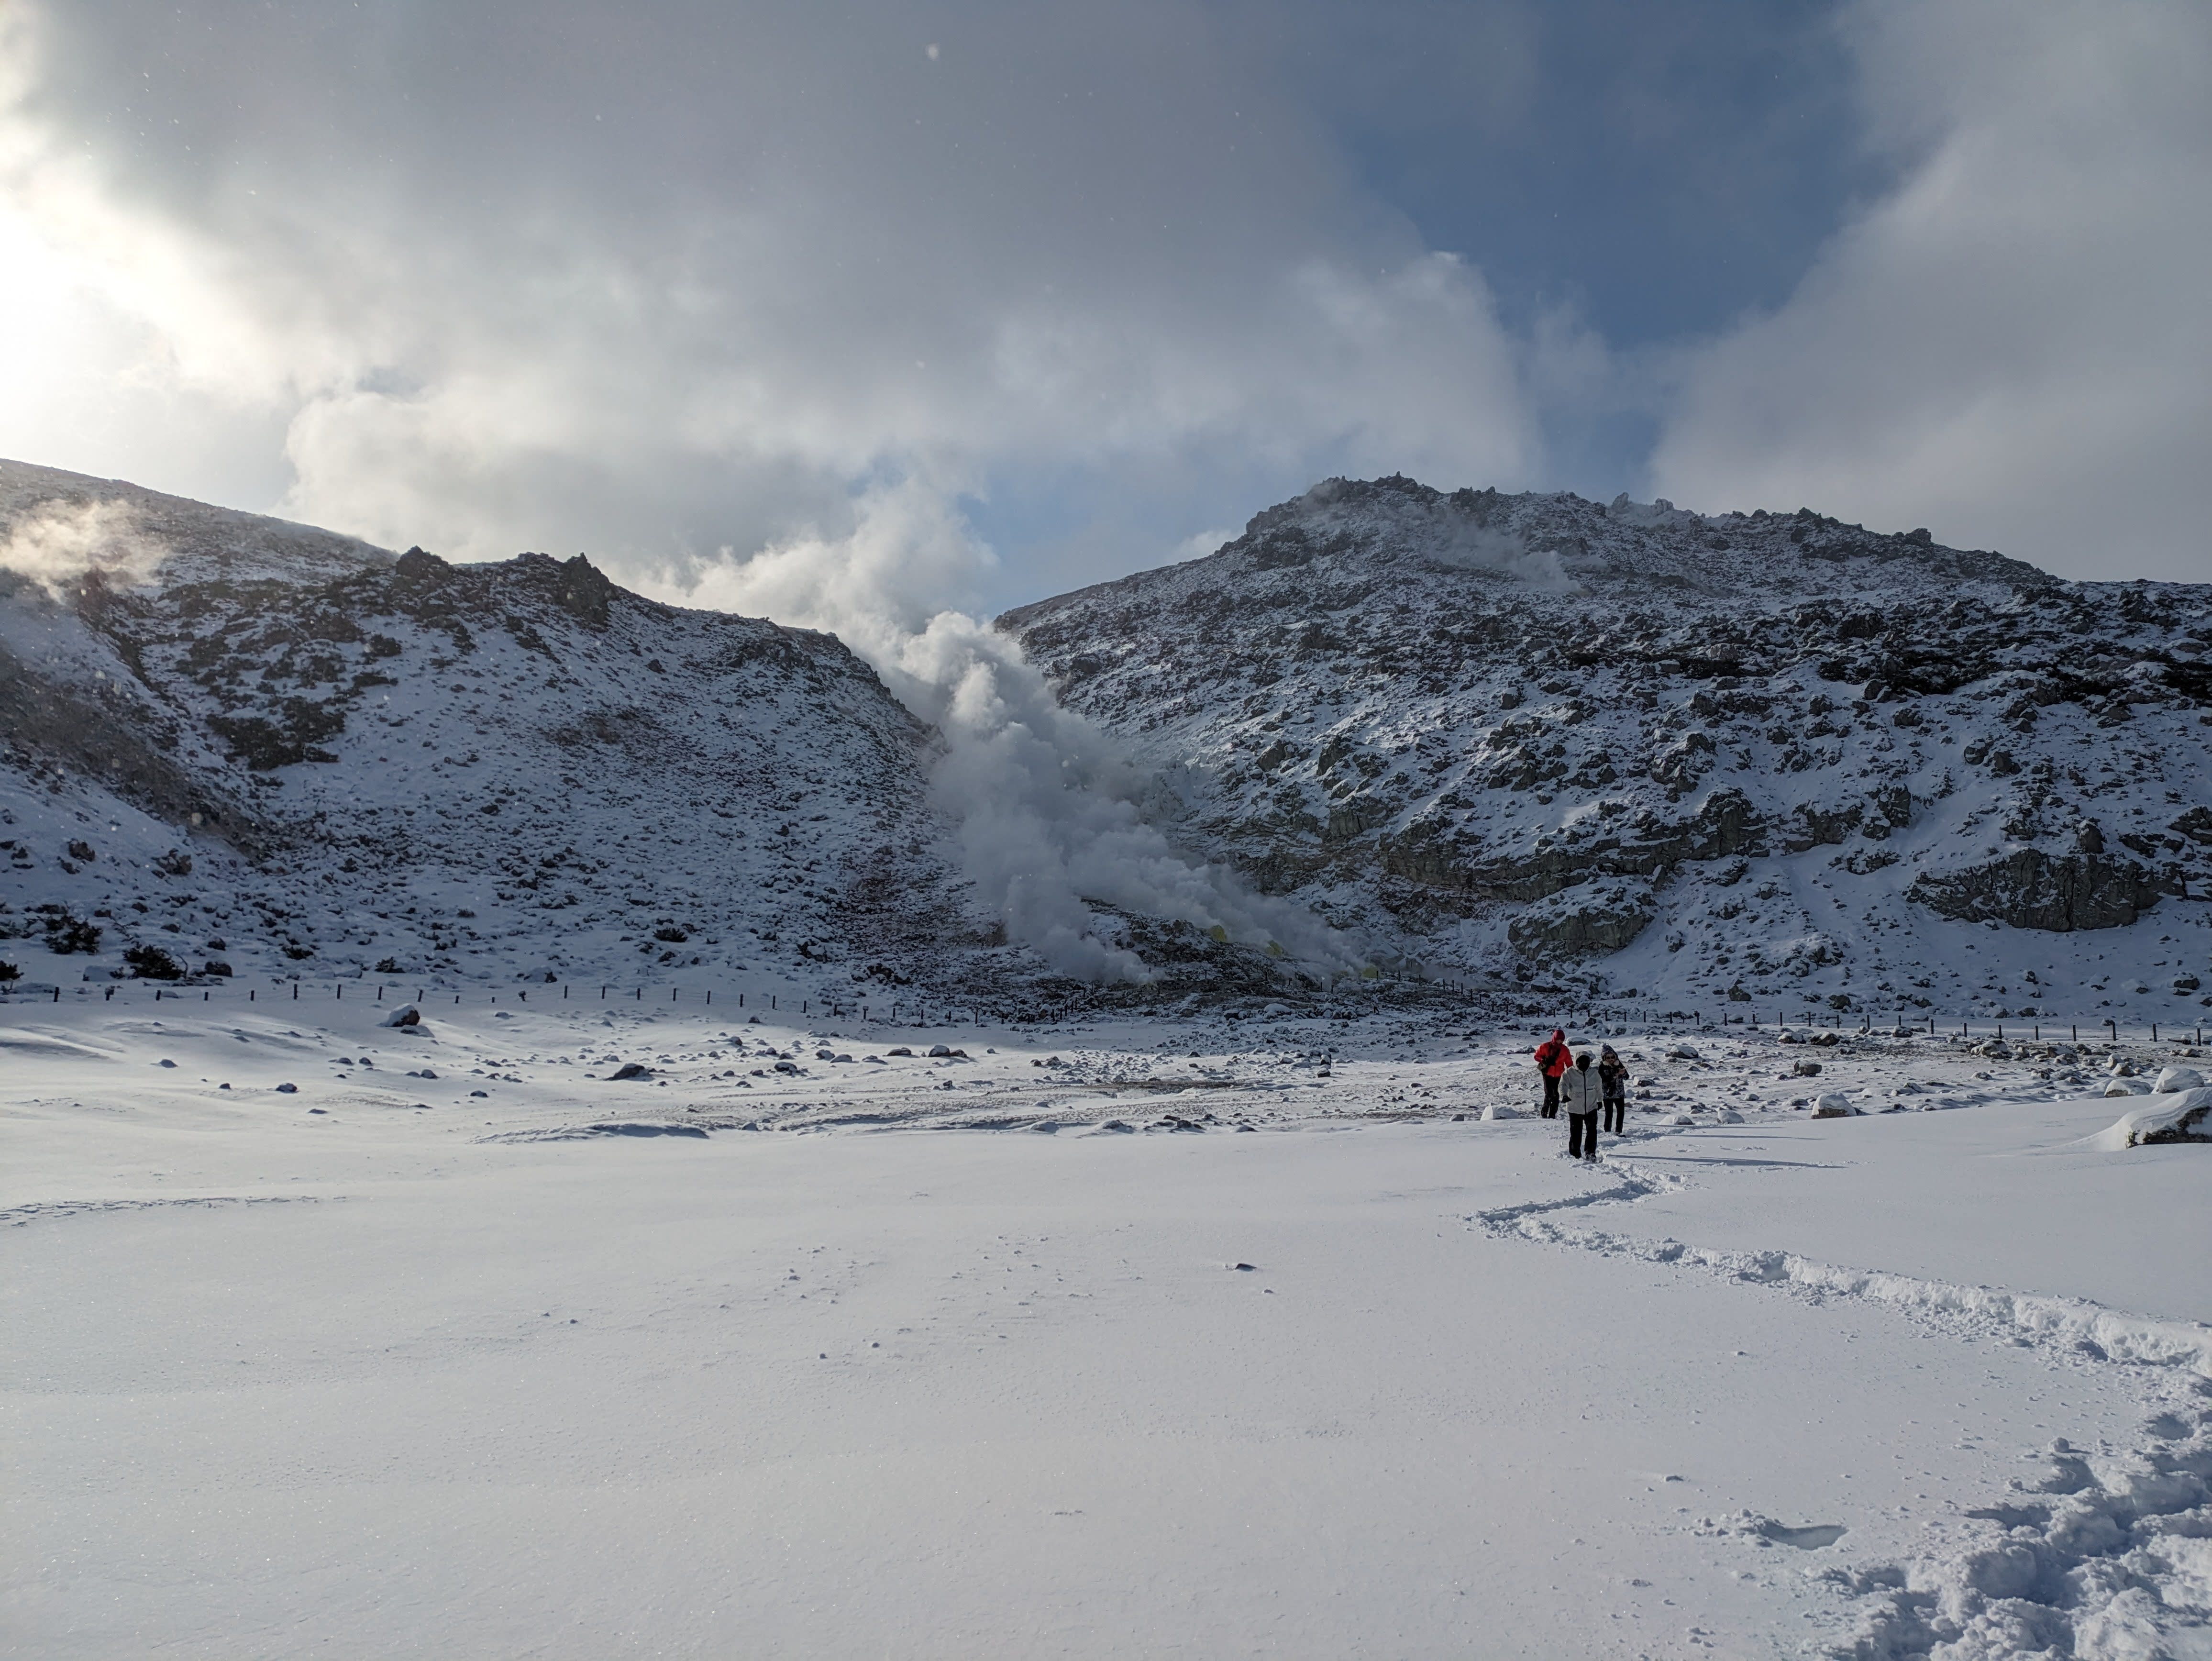 Guests leave a trail of footprints in the snow as they approach Mt. Io, its steam rushing upward towards the clouds in heaven.